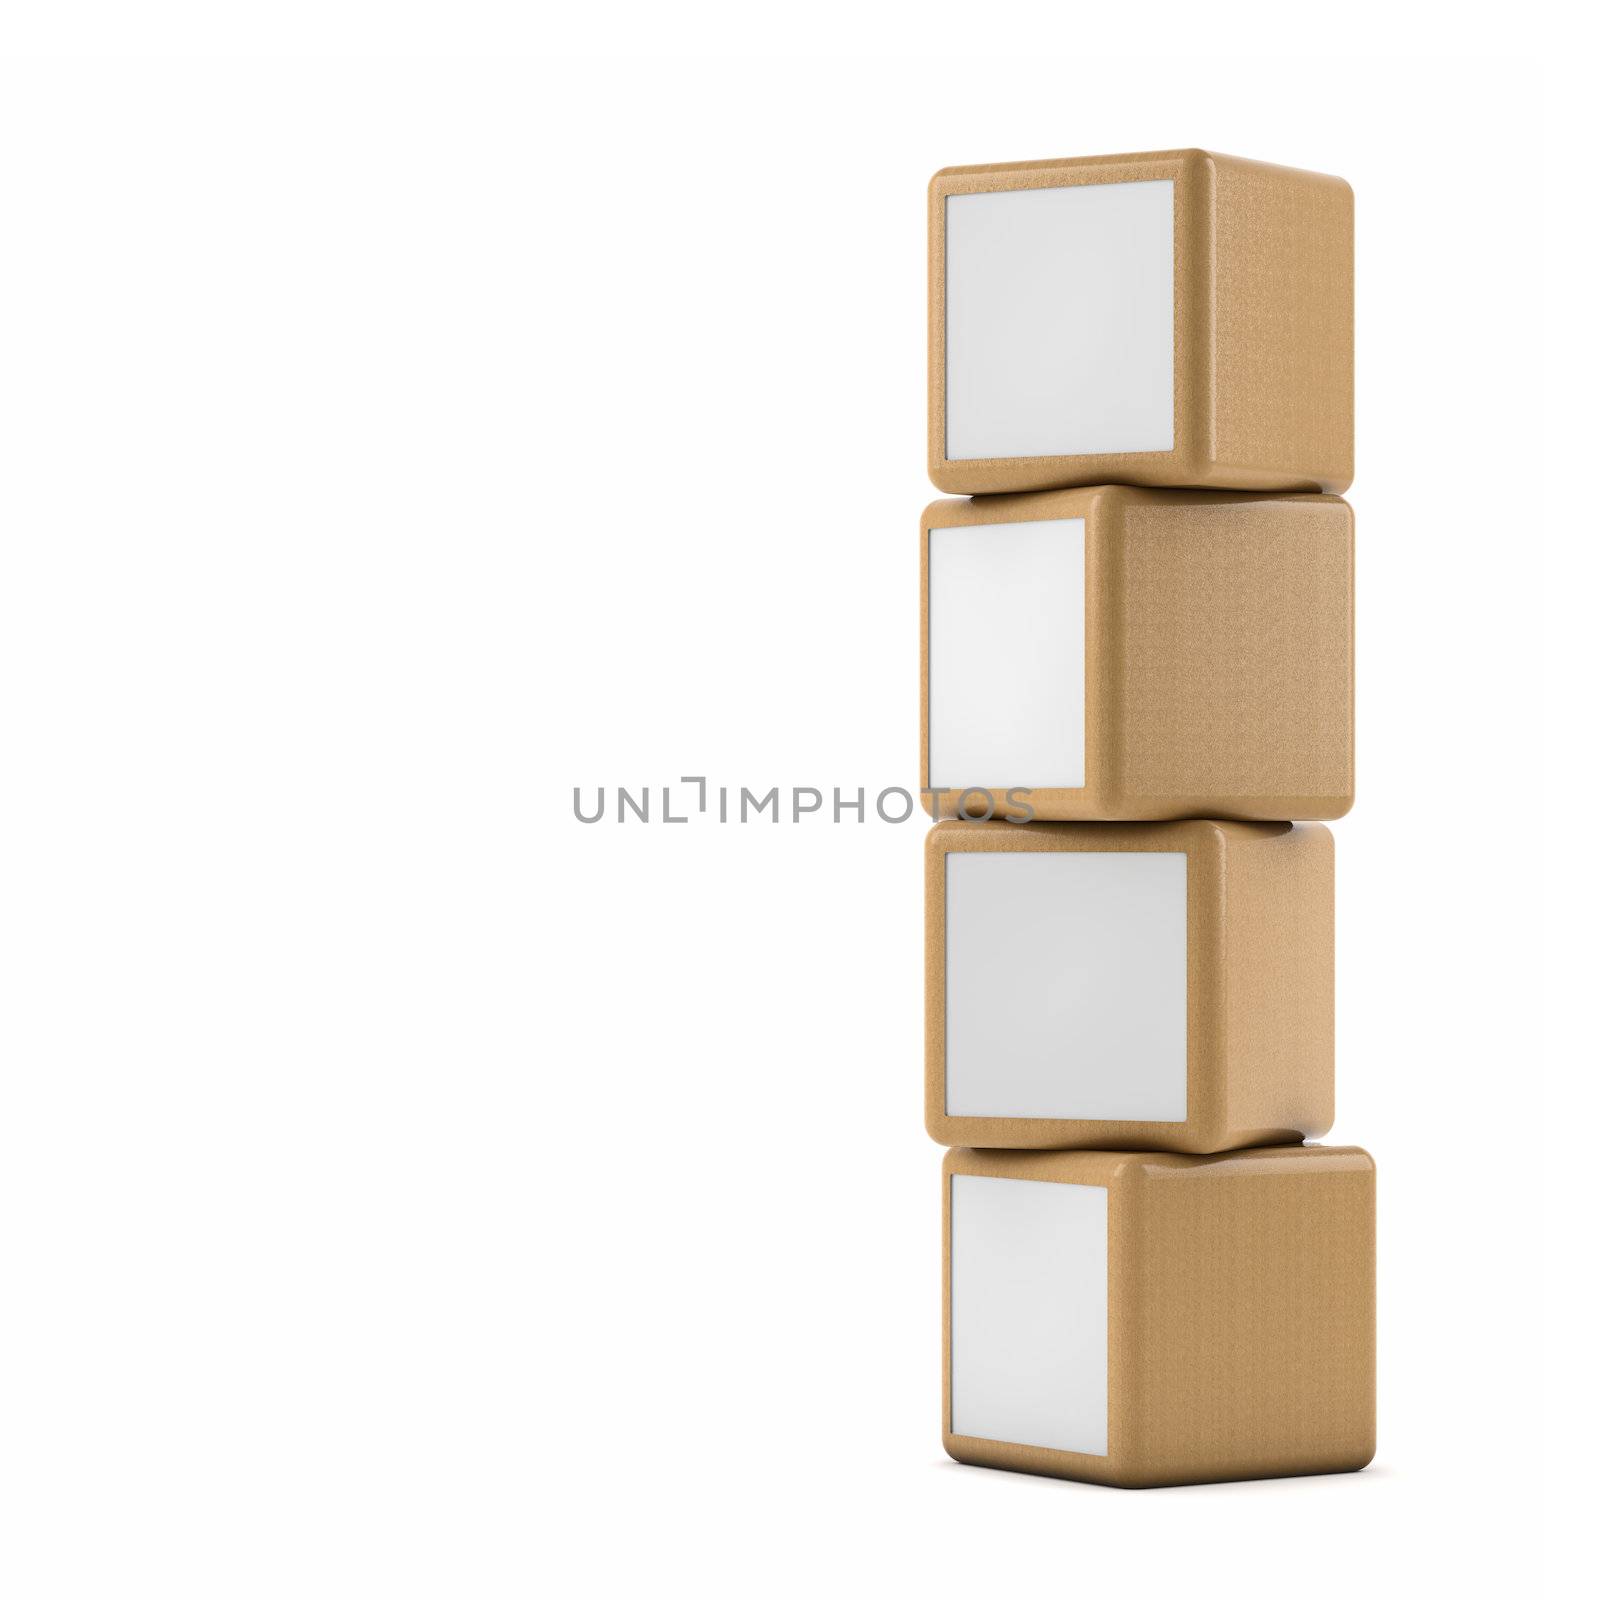 Advertising boxes by dynamicfoto